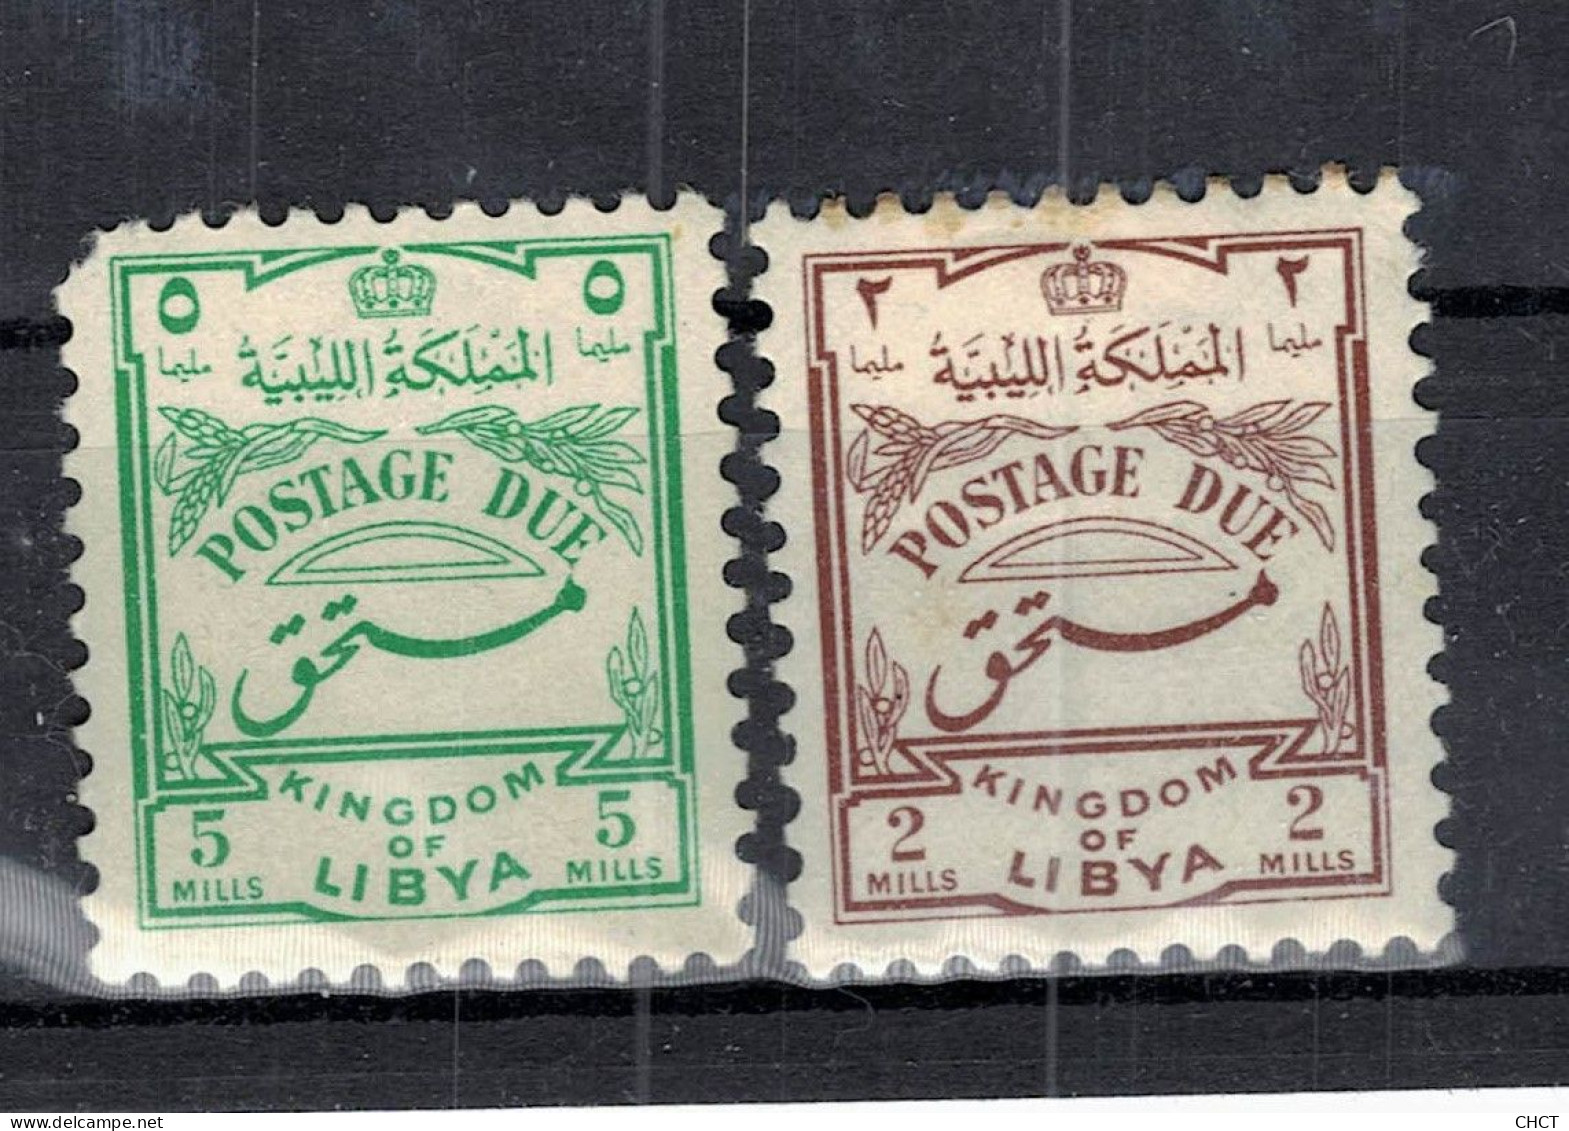 CHCT81 - Postage Due Stamps, MH, 1952, Libya - Libyen